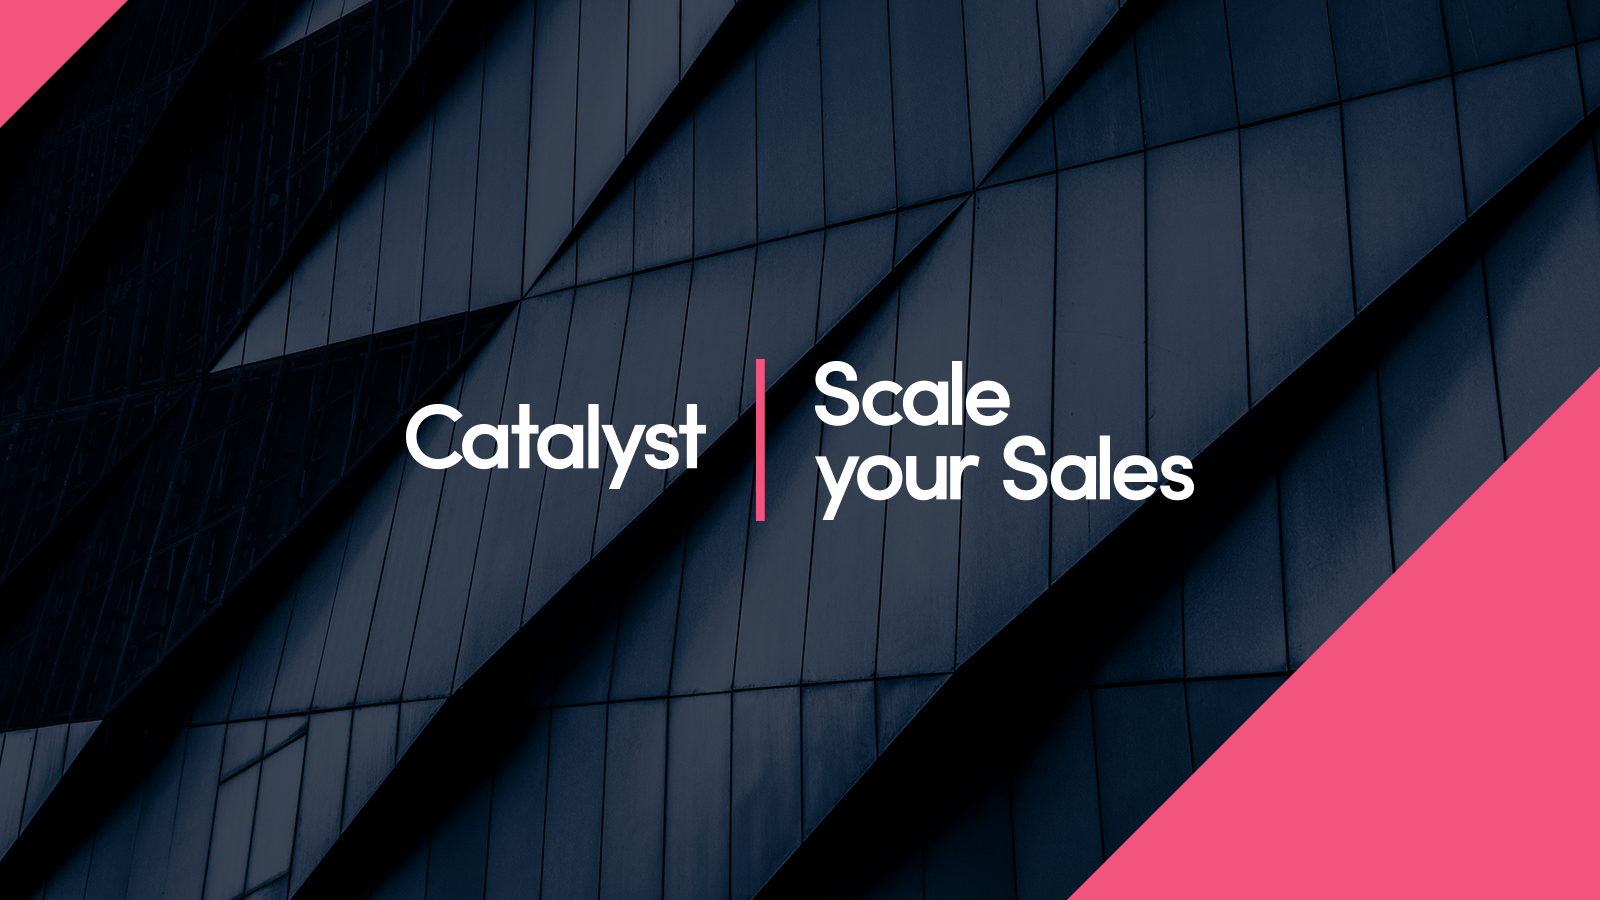 Scale your Sales